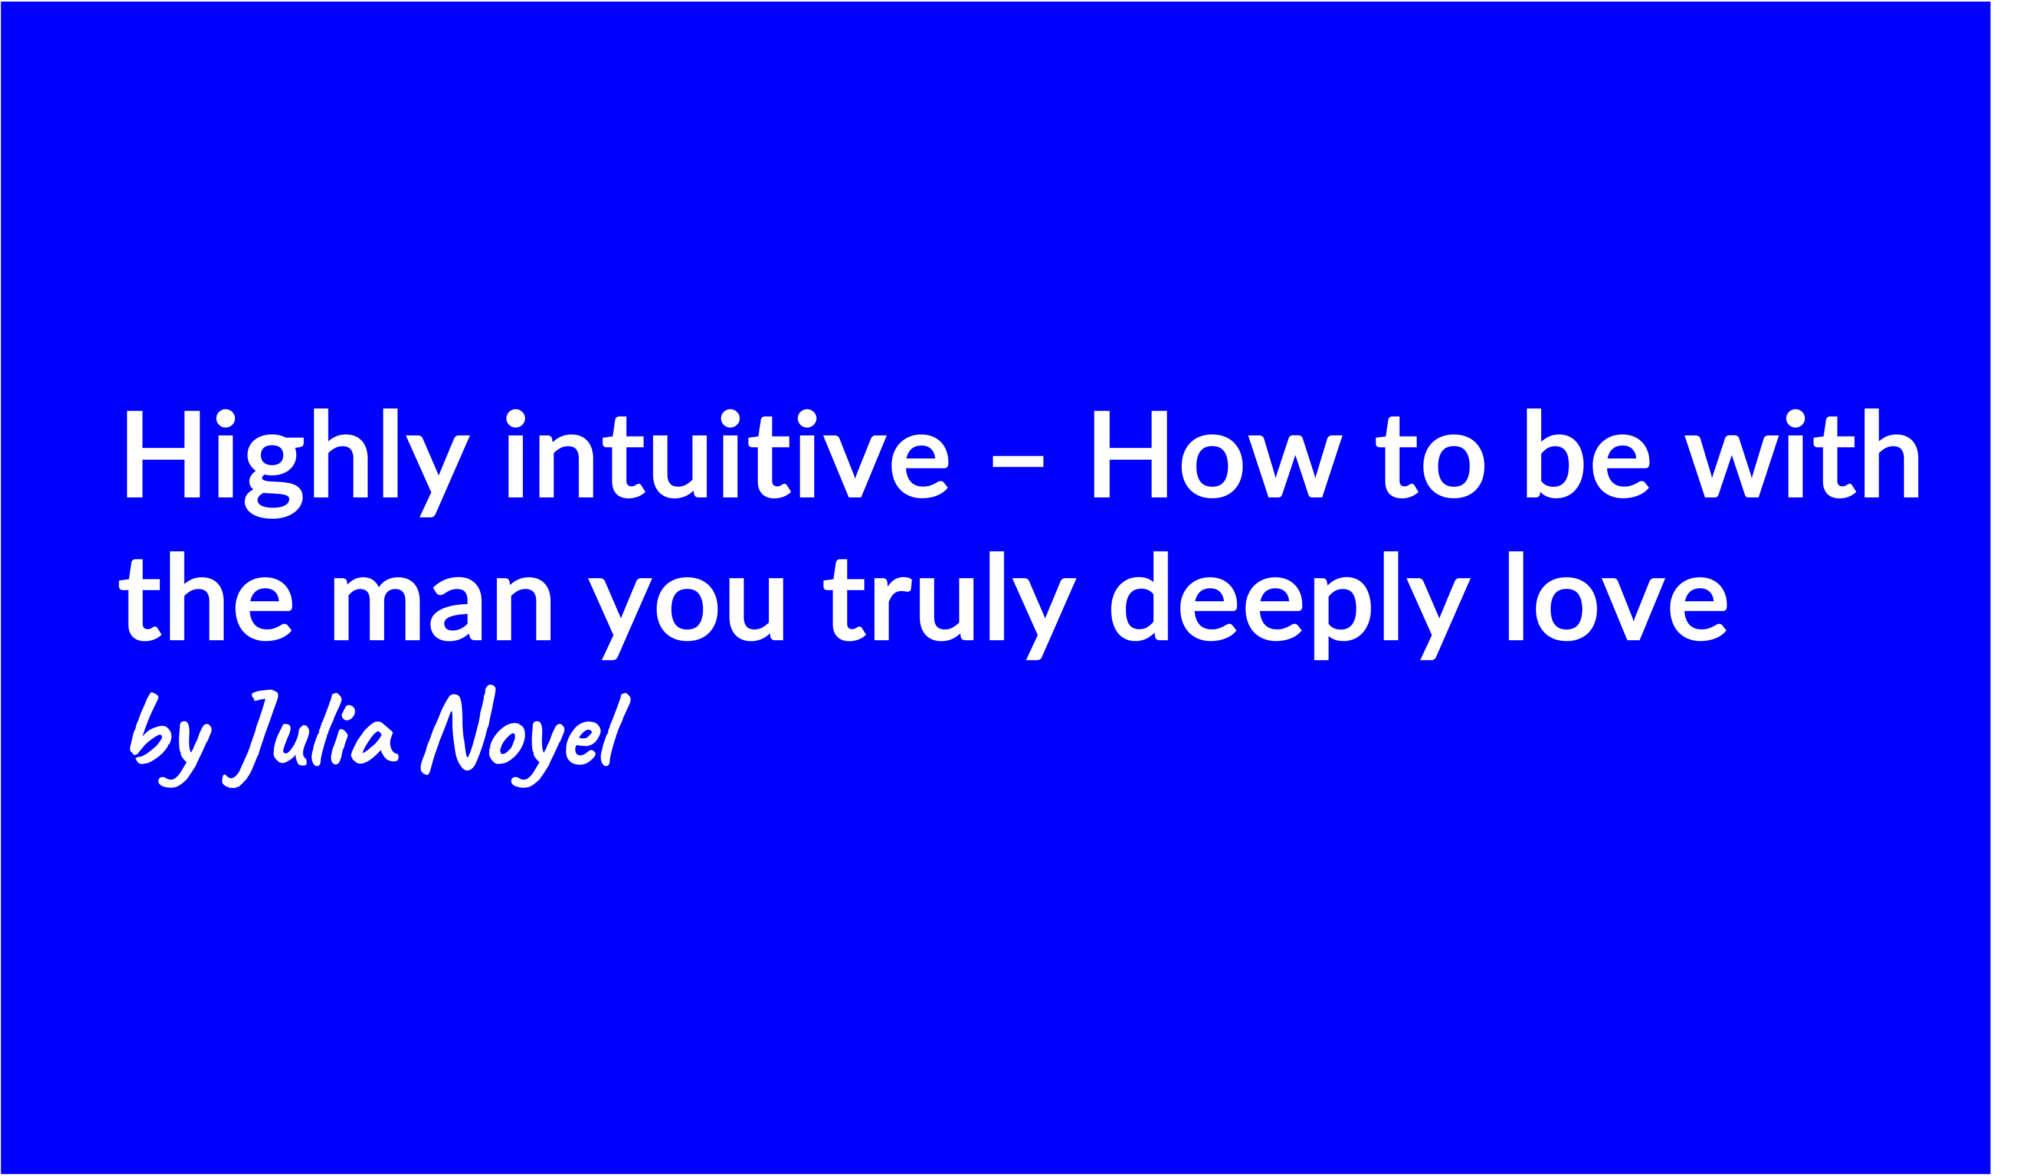 Highly intuitive – How to be with the man you truly deeply love by Julia Noyel